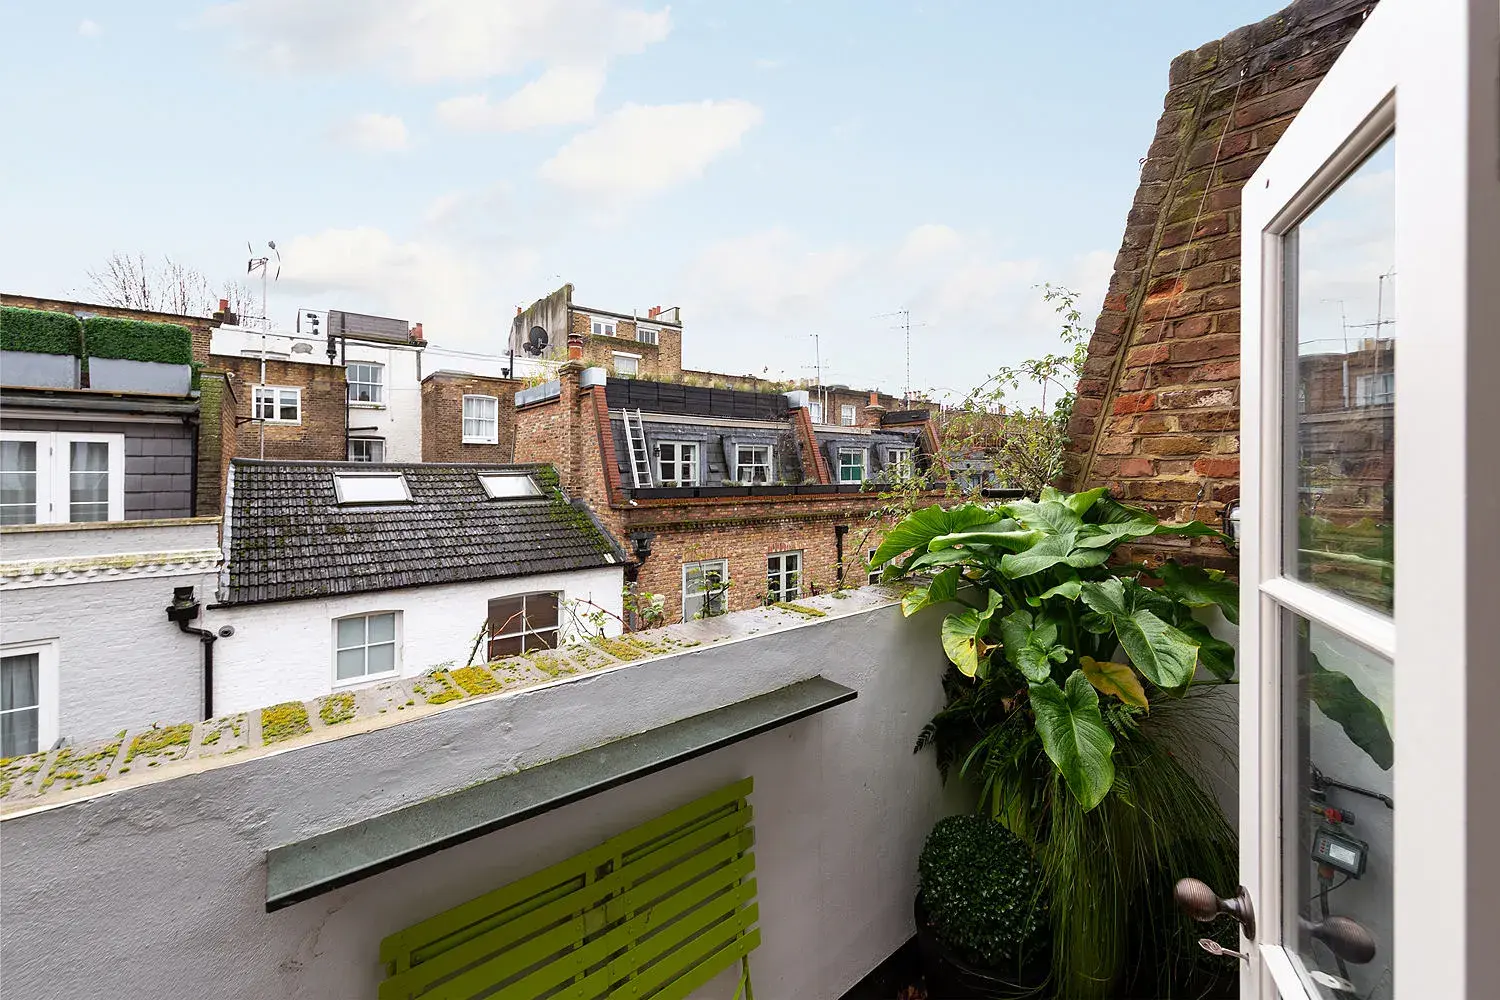 St Luke's Mews, holiday home in Notting Hill, London